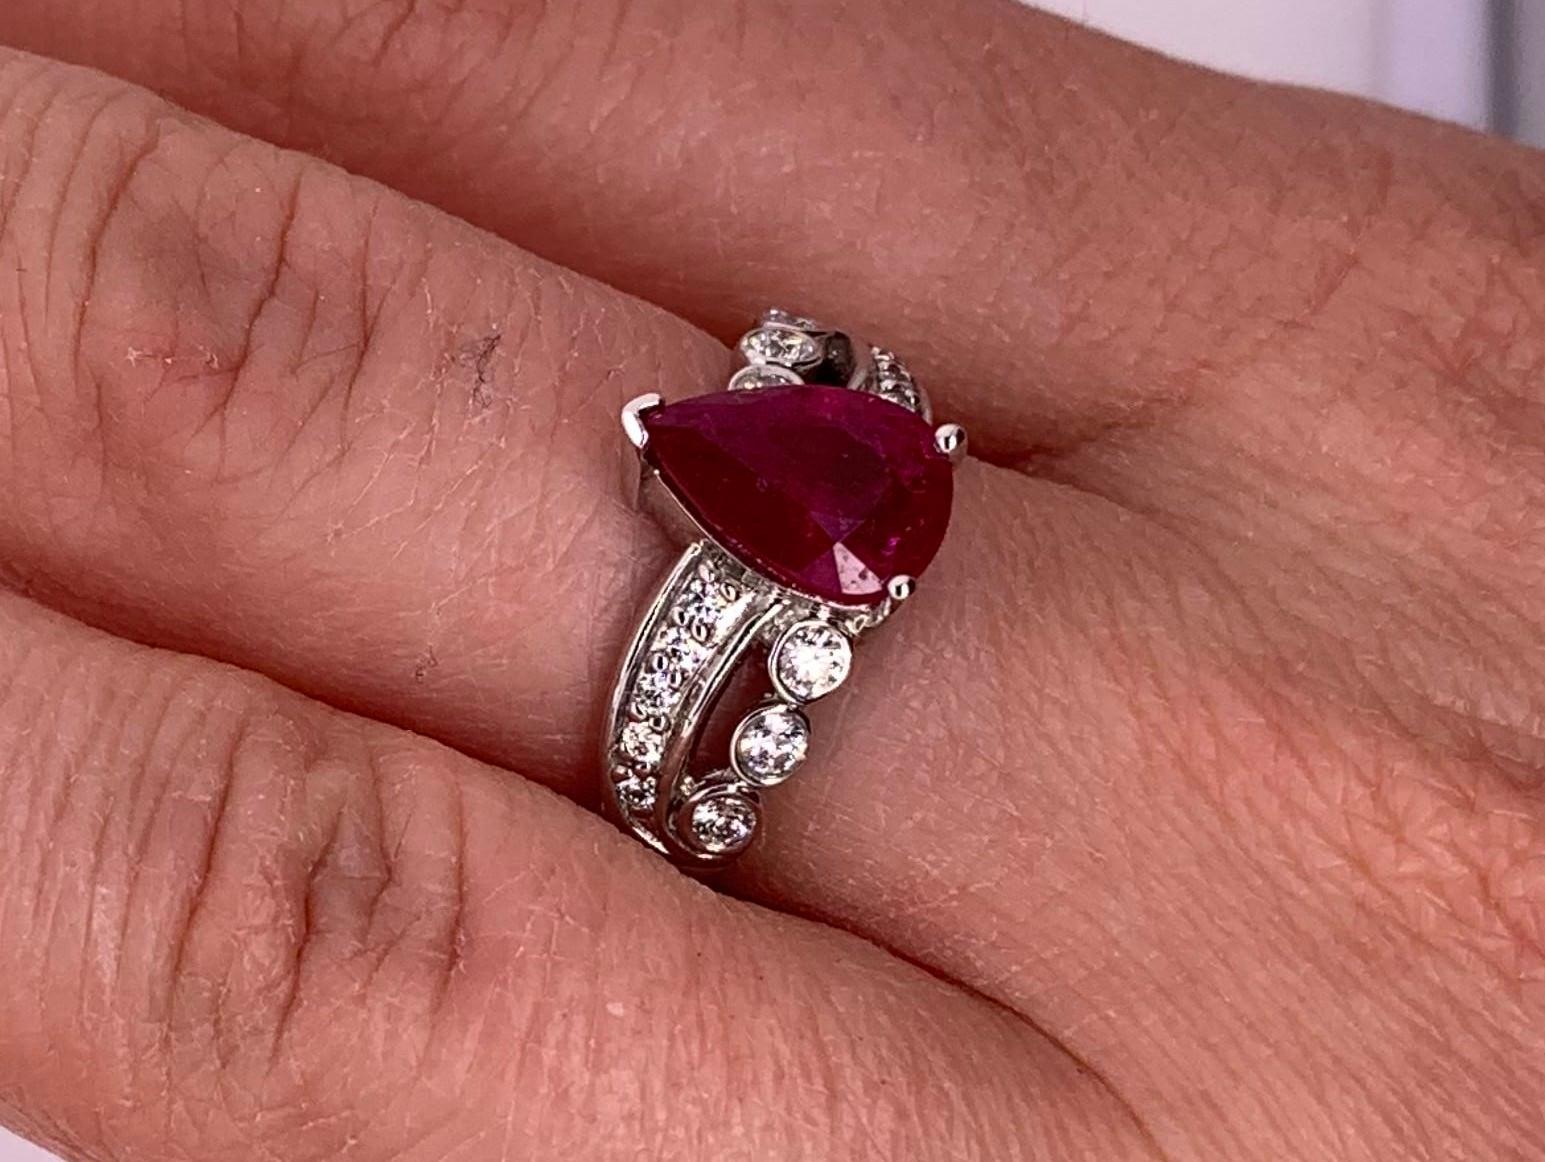 Pear Cut 1.97 Carat Ruby Engagement Ring with Swirl Diamond Fashion Band For Sale